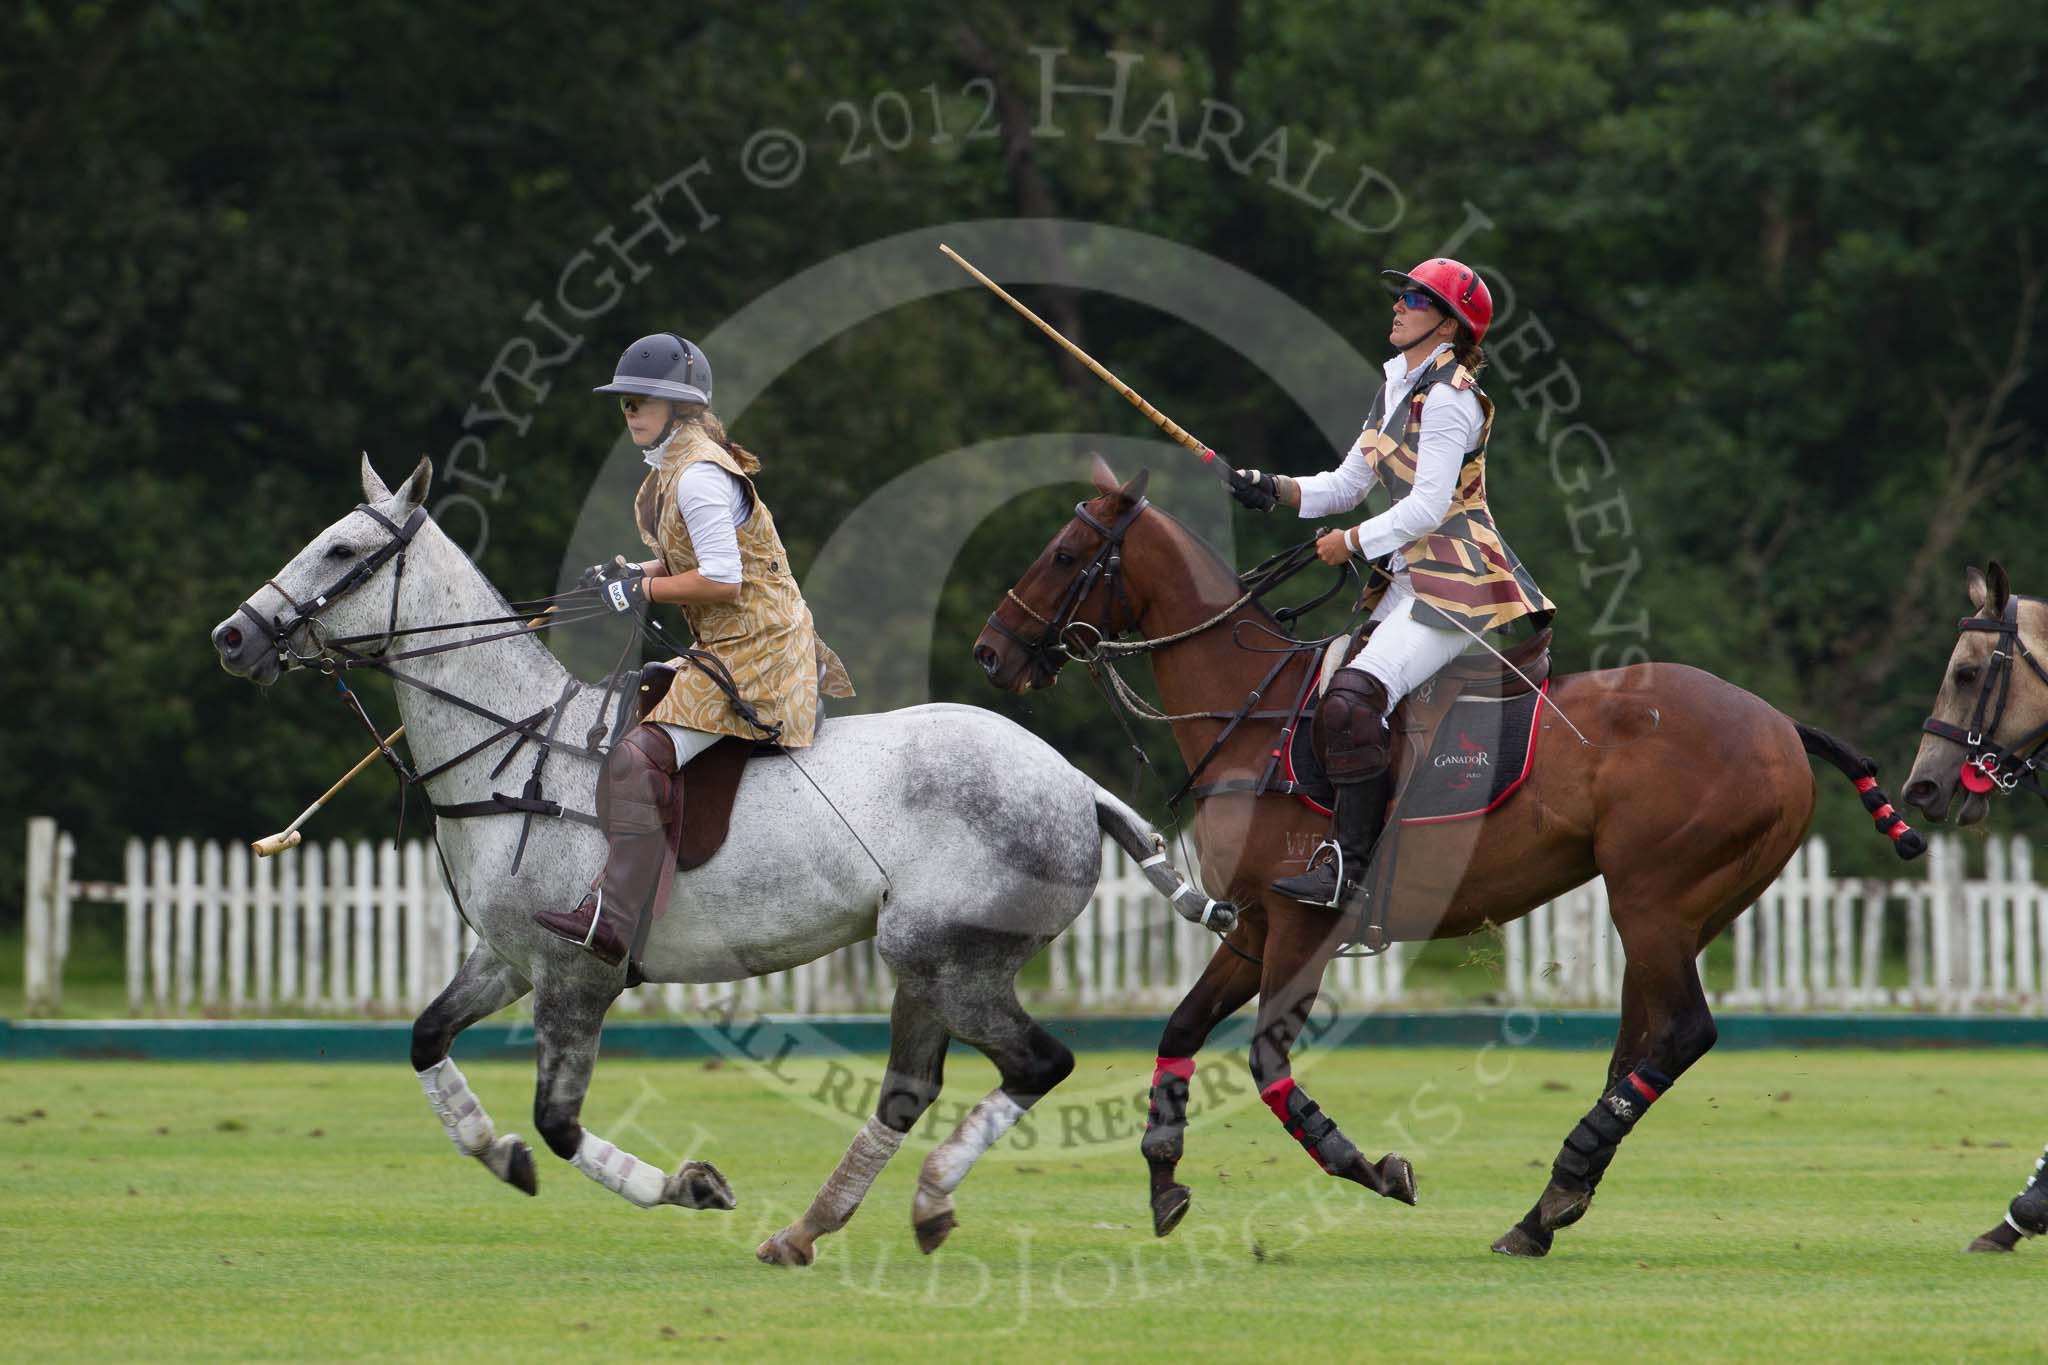 7th Heritage Polo Cup semi-finals: Emma Boers & Sarah Wisman..
Hurtwood Park Polo Club,
Ewhurst Green,
Surrey,
United Kingdom,
on 04 August 2012 at 13:11, image #105